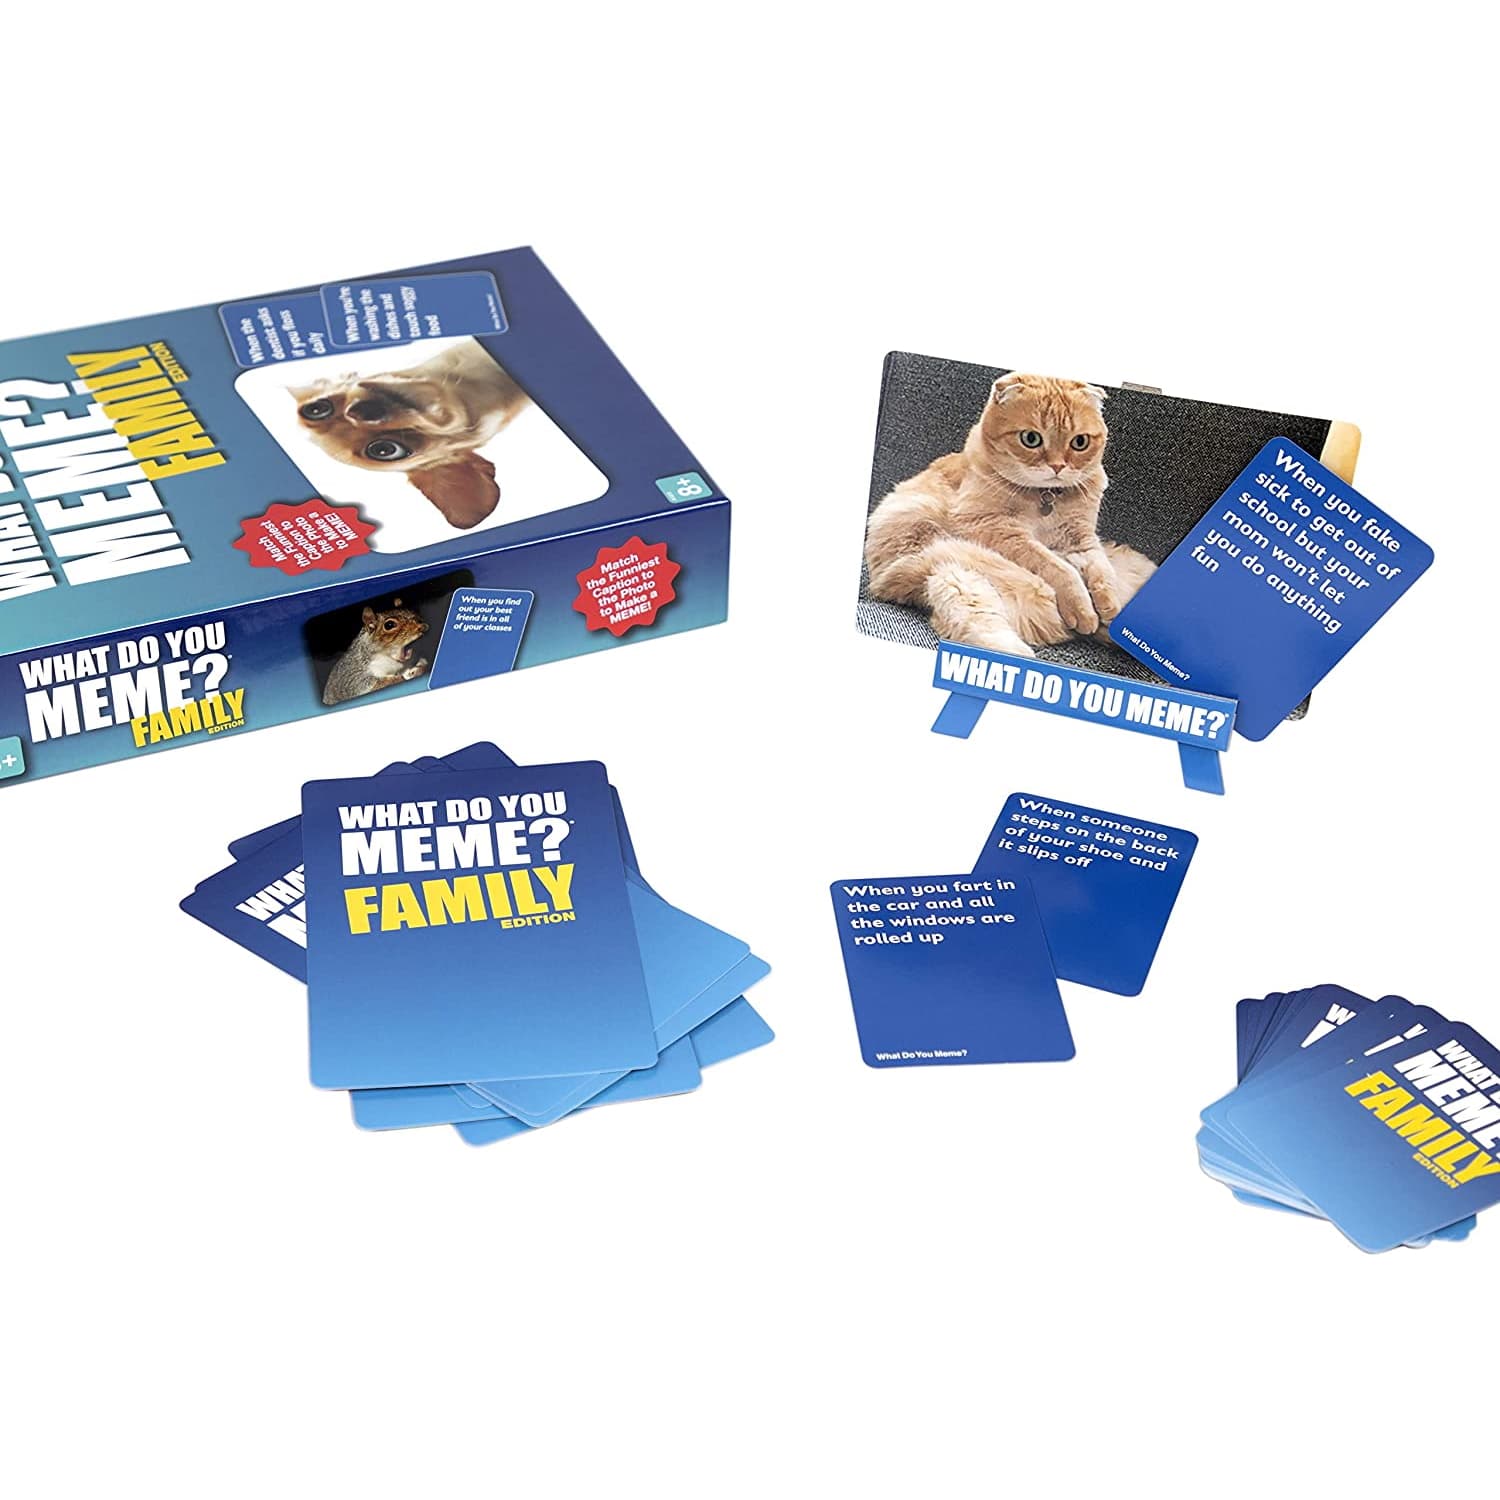 7 Best Family Card Games Selection (Jun. 2021)